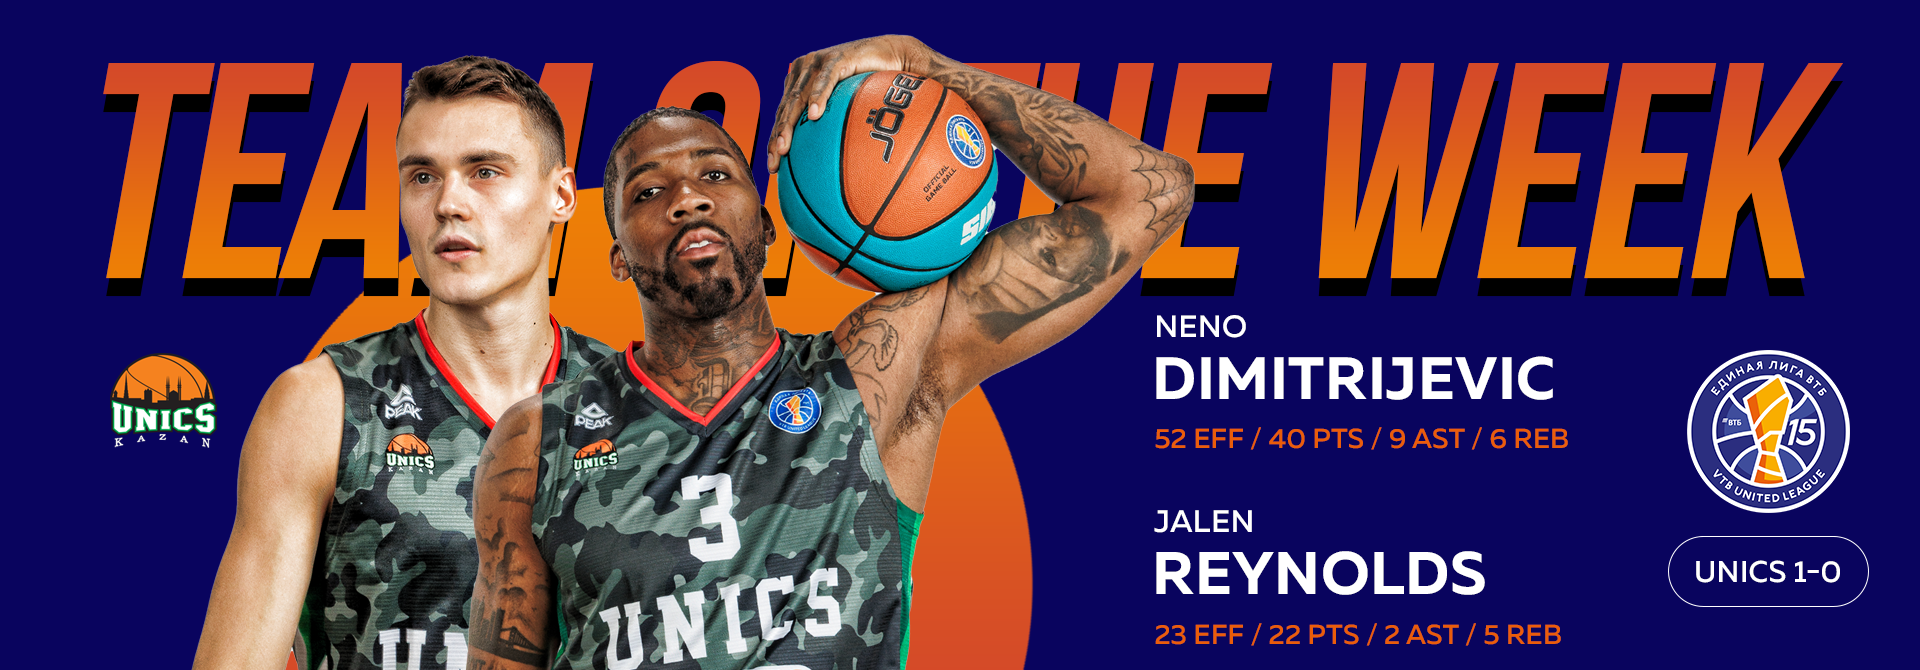 Neno Dimitrijevic and Jalen Reynolds were included in the Team of the Week!